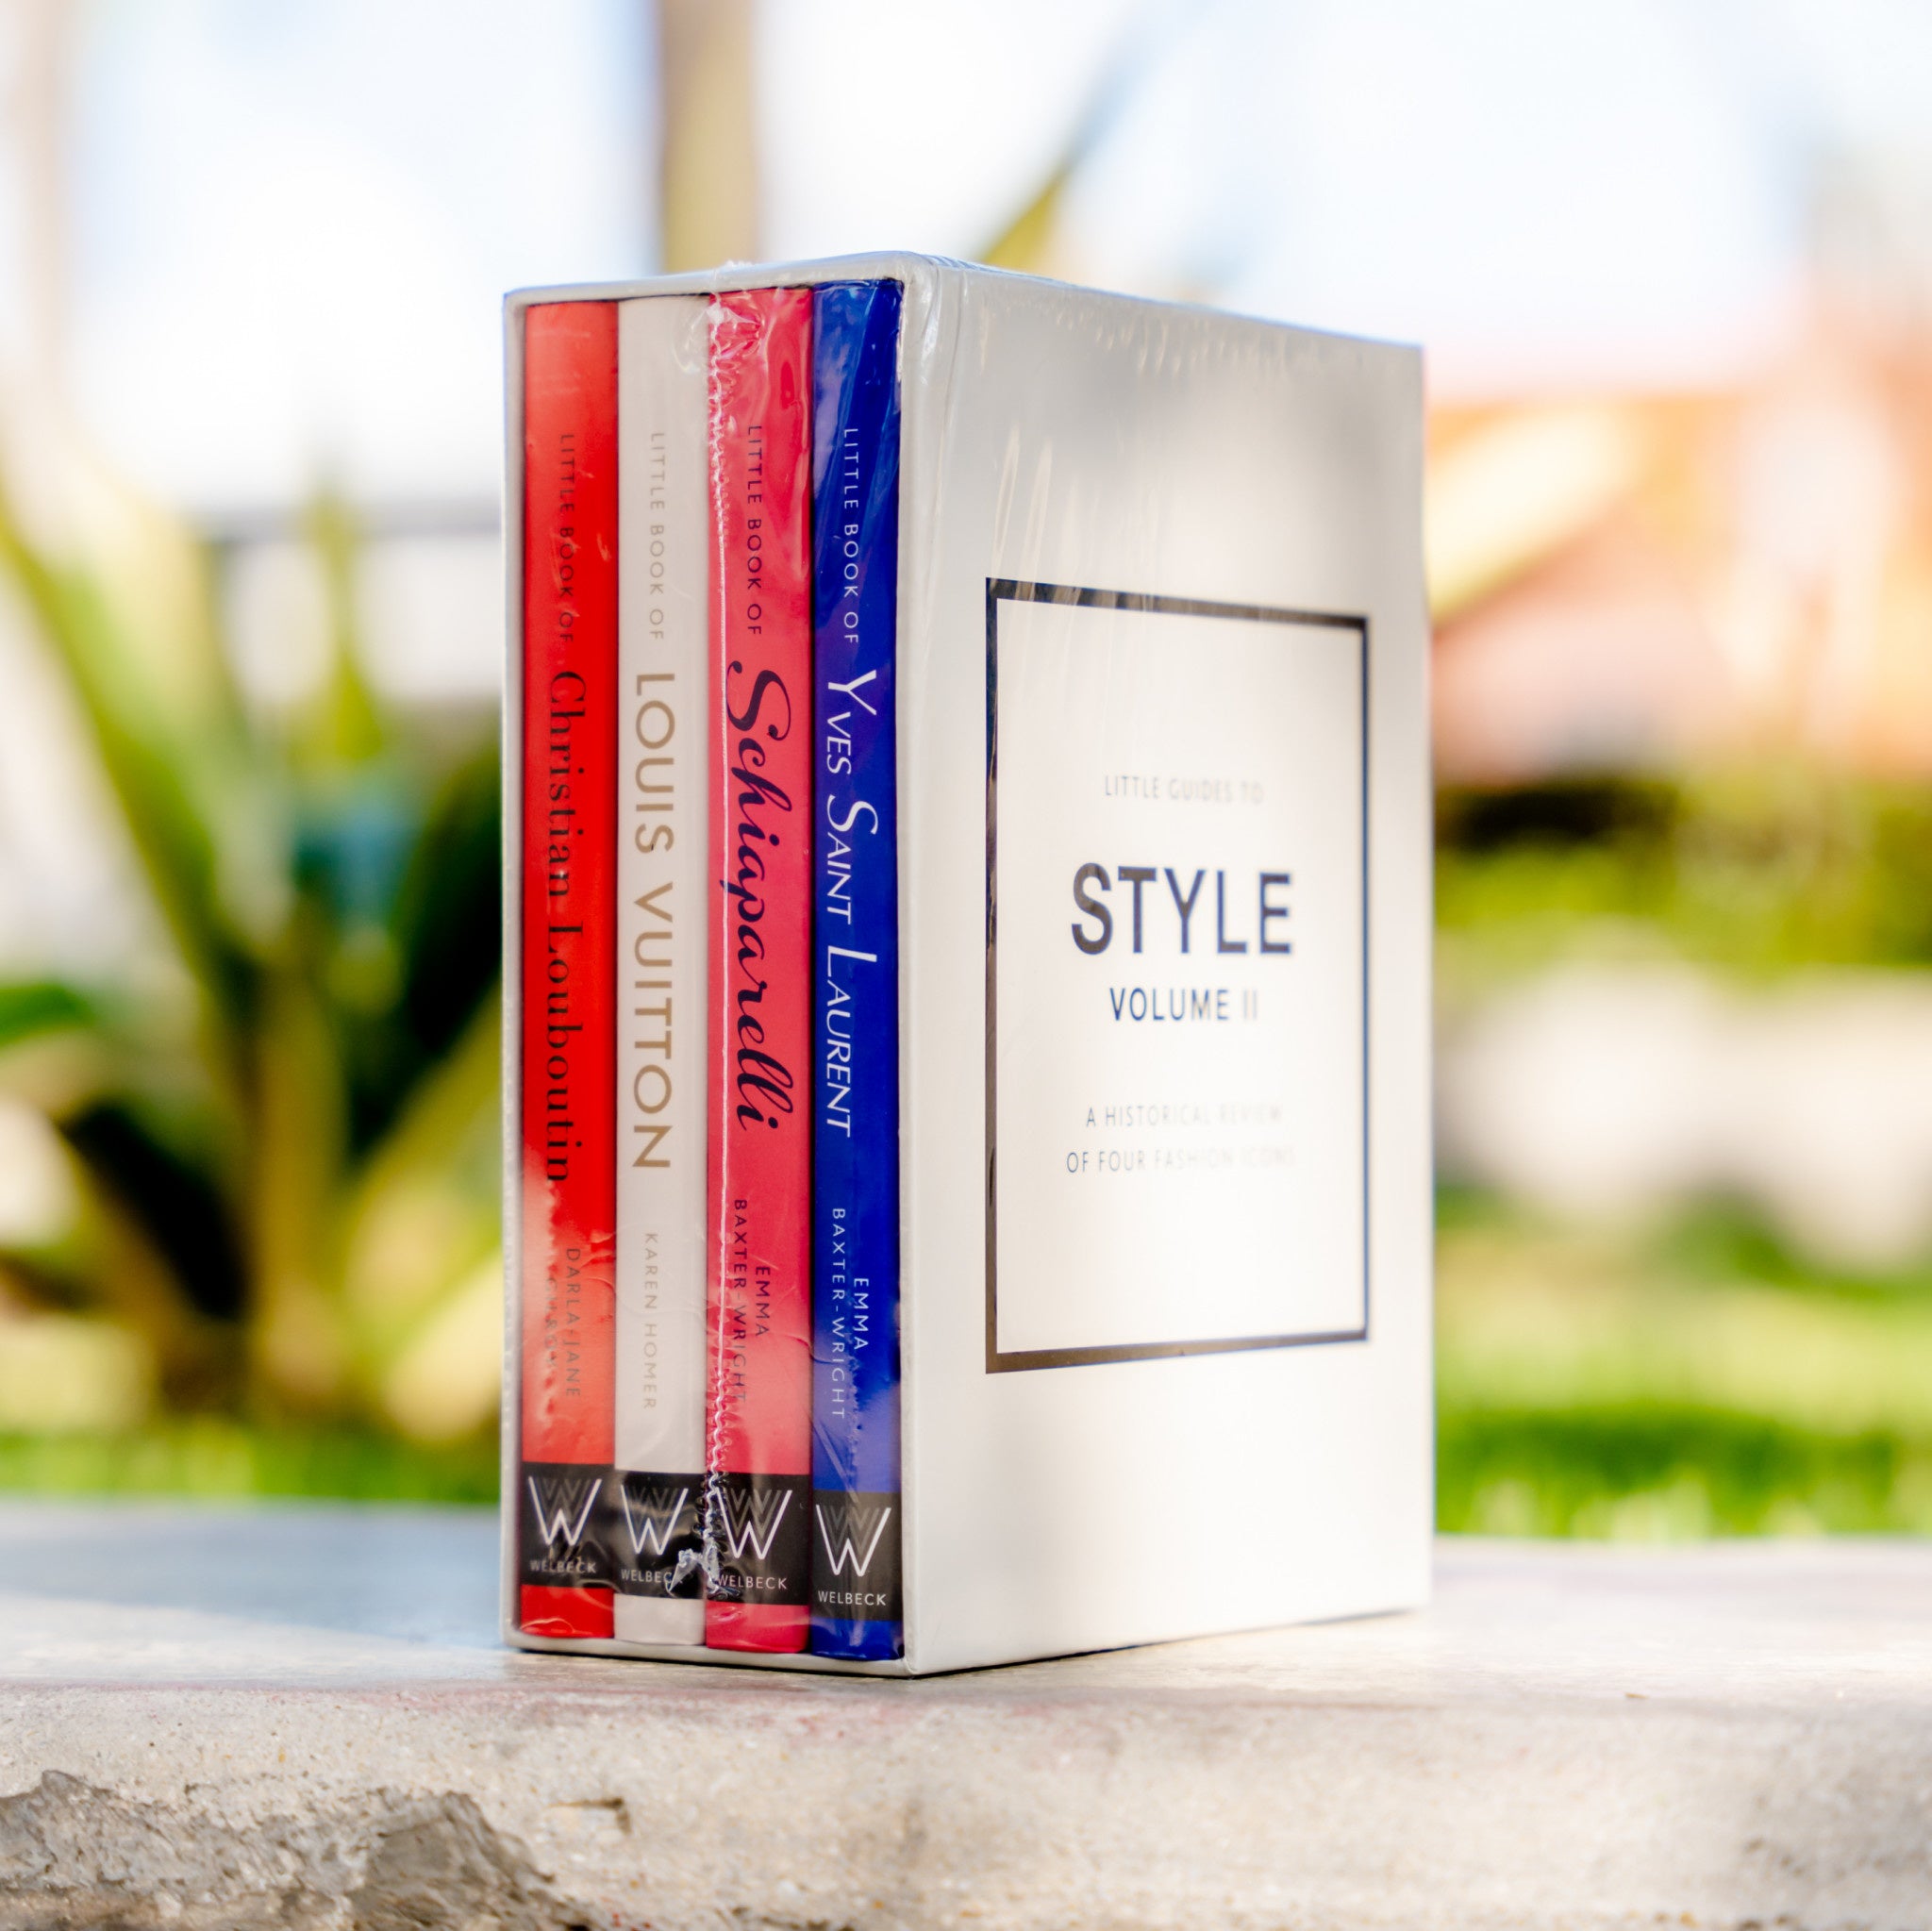 Little Guides to Style: The Story of by Baxter-Wright, Emma